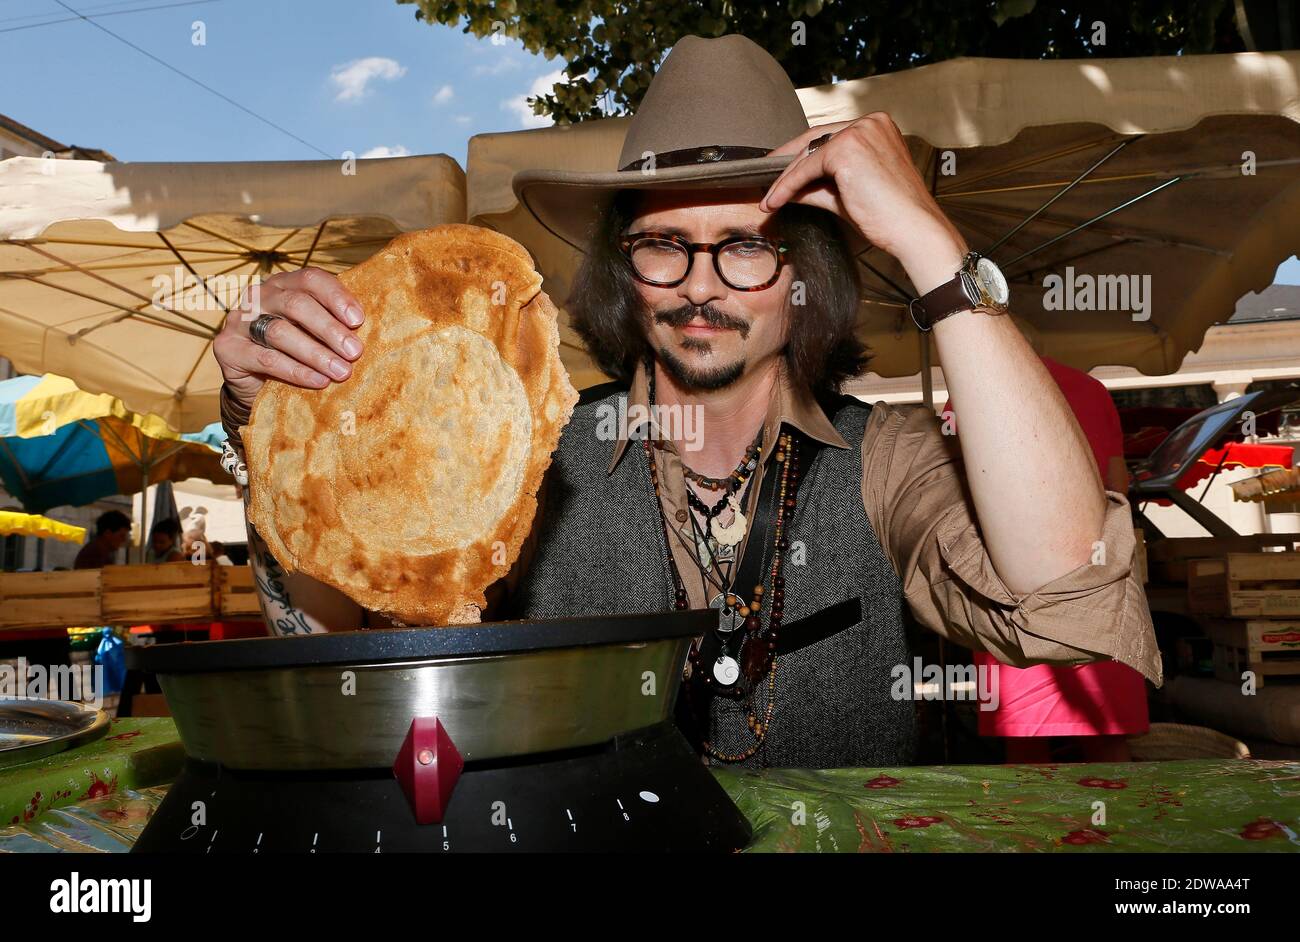 Exclusive - French Johnny Depp look-alike, Stephane Cons, also called Johnny Steff, just launched a new culinary activity in the South of France. In many different regional local markets, and especially in Perigueux, Cons runs a Crepes (pancakes) stand under the brand name 'Johnny Crepp'. For a year now, this former plants seller (in a garden center) changed his life to become the French Depp's look-a-like. Similar to Johnny Depp, Stephane Cons, 46, decided to make competitions, to audition roles, etc.. After some time, Cons figured out that he was the only official Depp's sosie in France. Joh Stock Photo